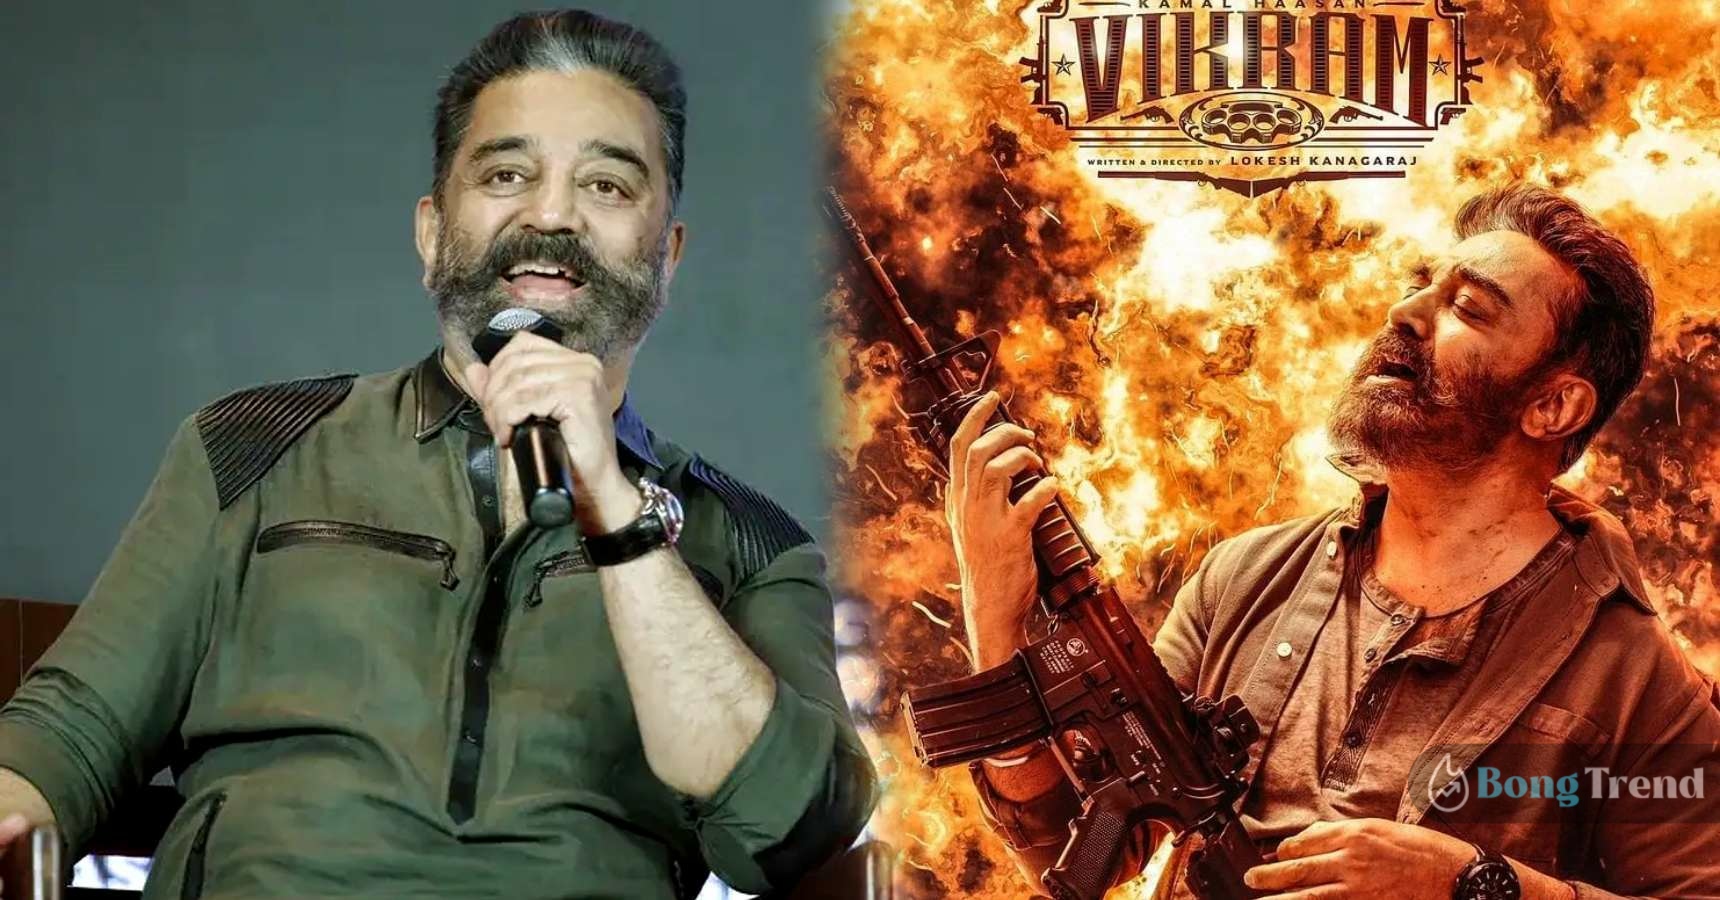 Kamal Hassan Vikram Movie became 4th highest opening day collection in South Industry